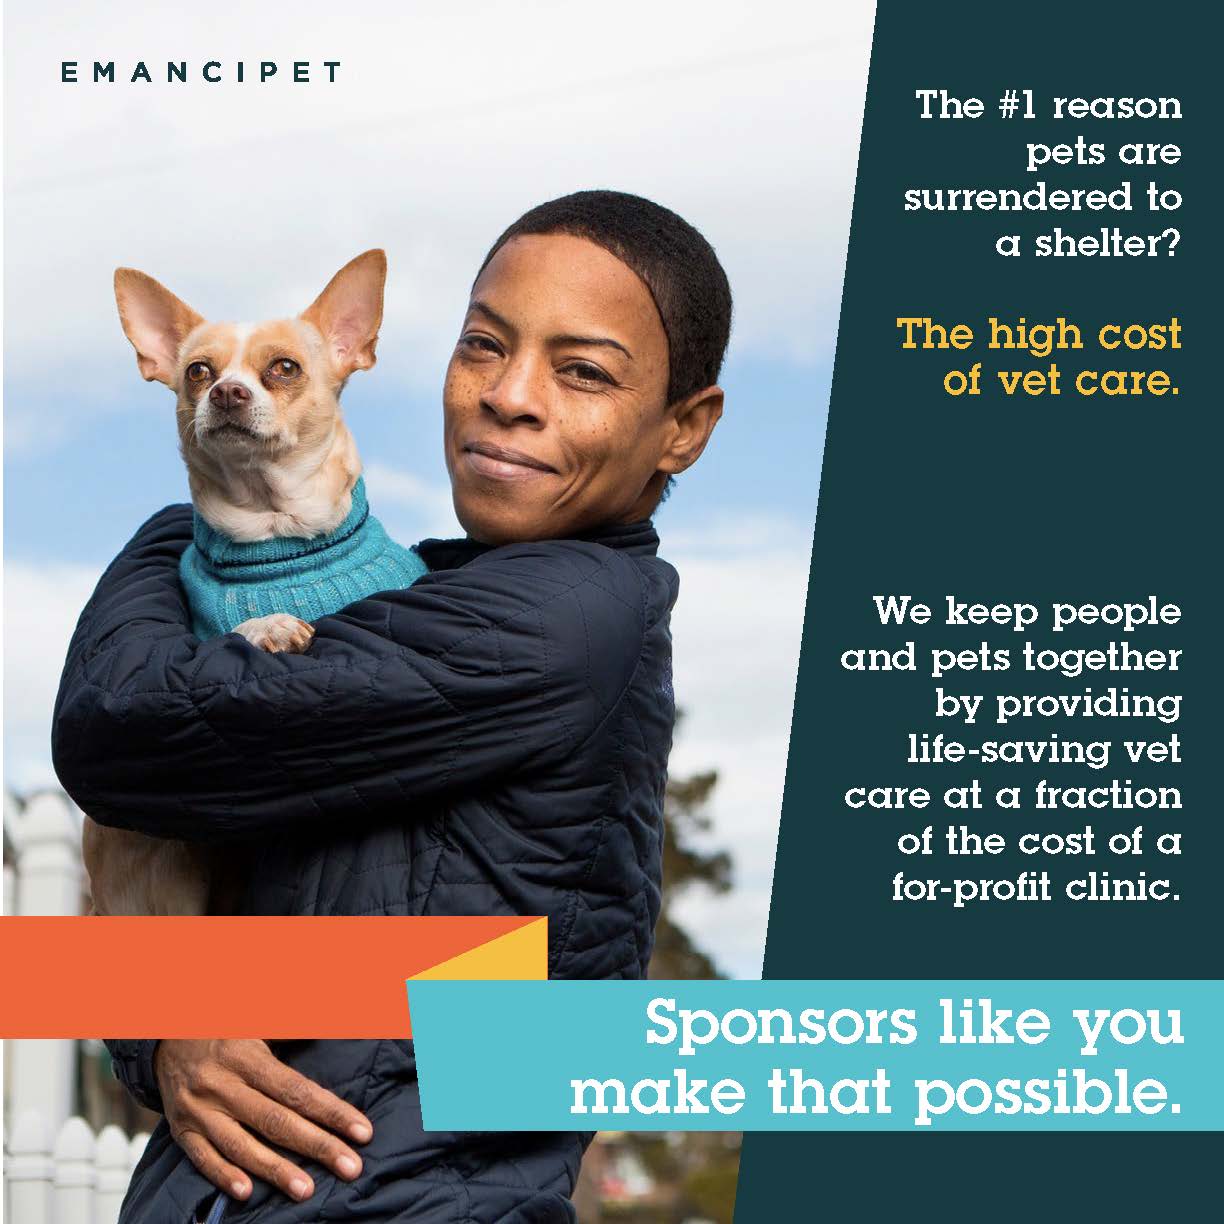 Text describing why sponsors are critical to Emancipet's work